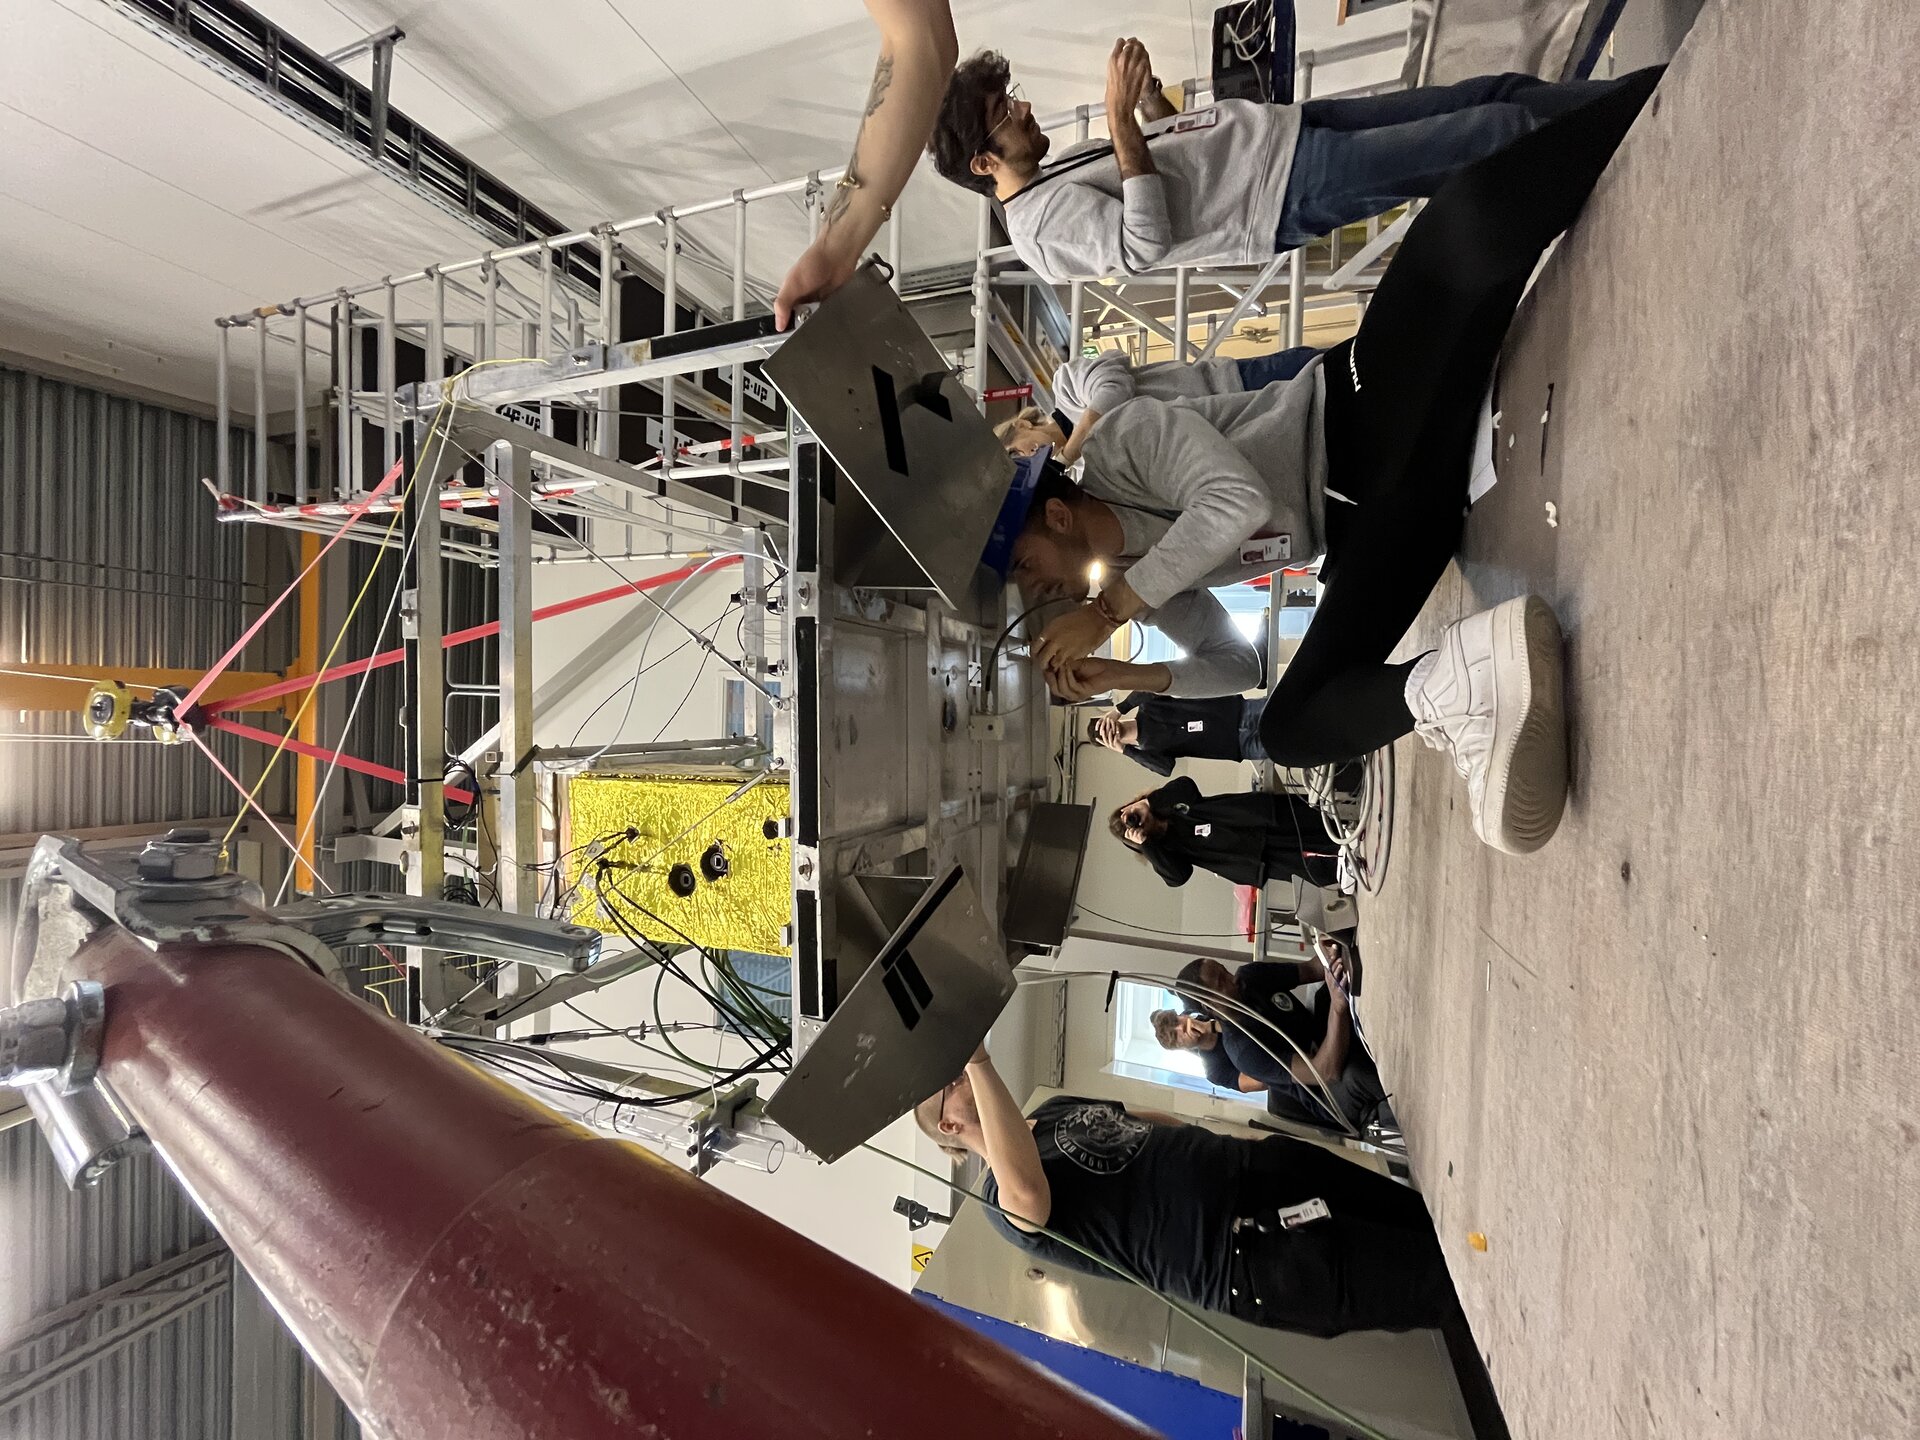 HERCCULES team installing a sensor of their experiment on the bottom of the gondola